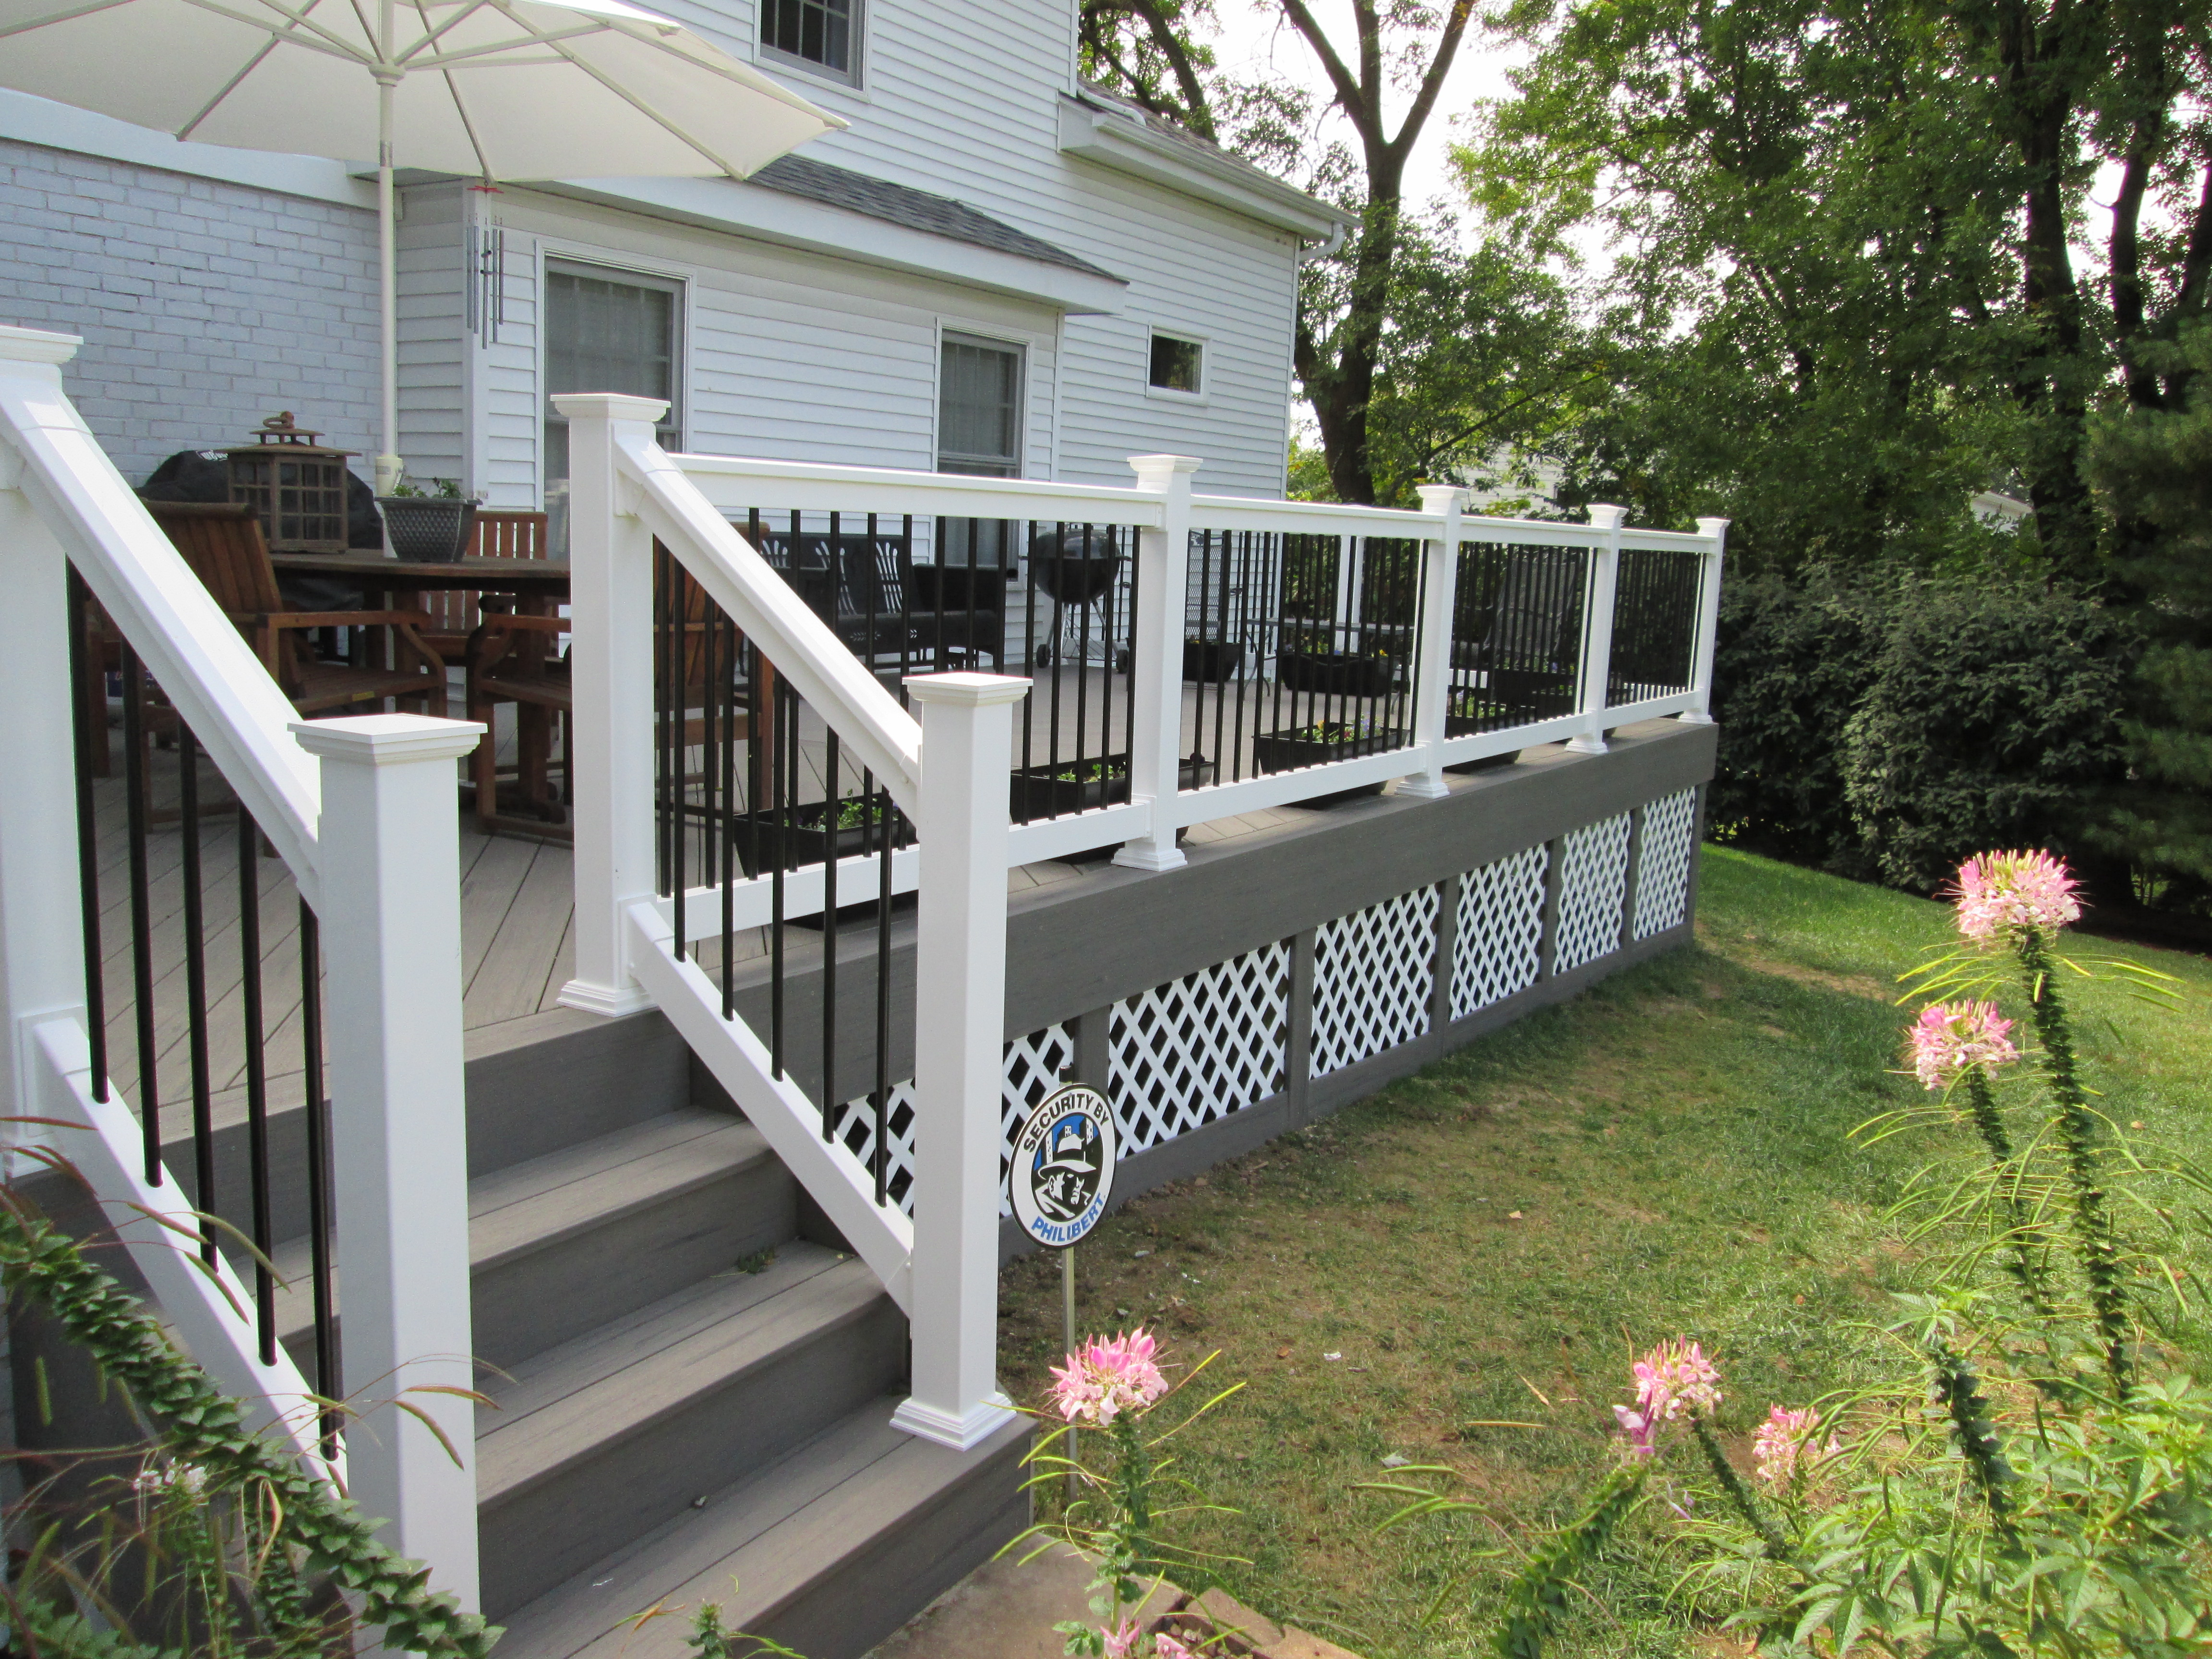 Choosing A Color Scheme For Your Deck St Louis Decks Screened within sizing 4608 X 3456